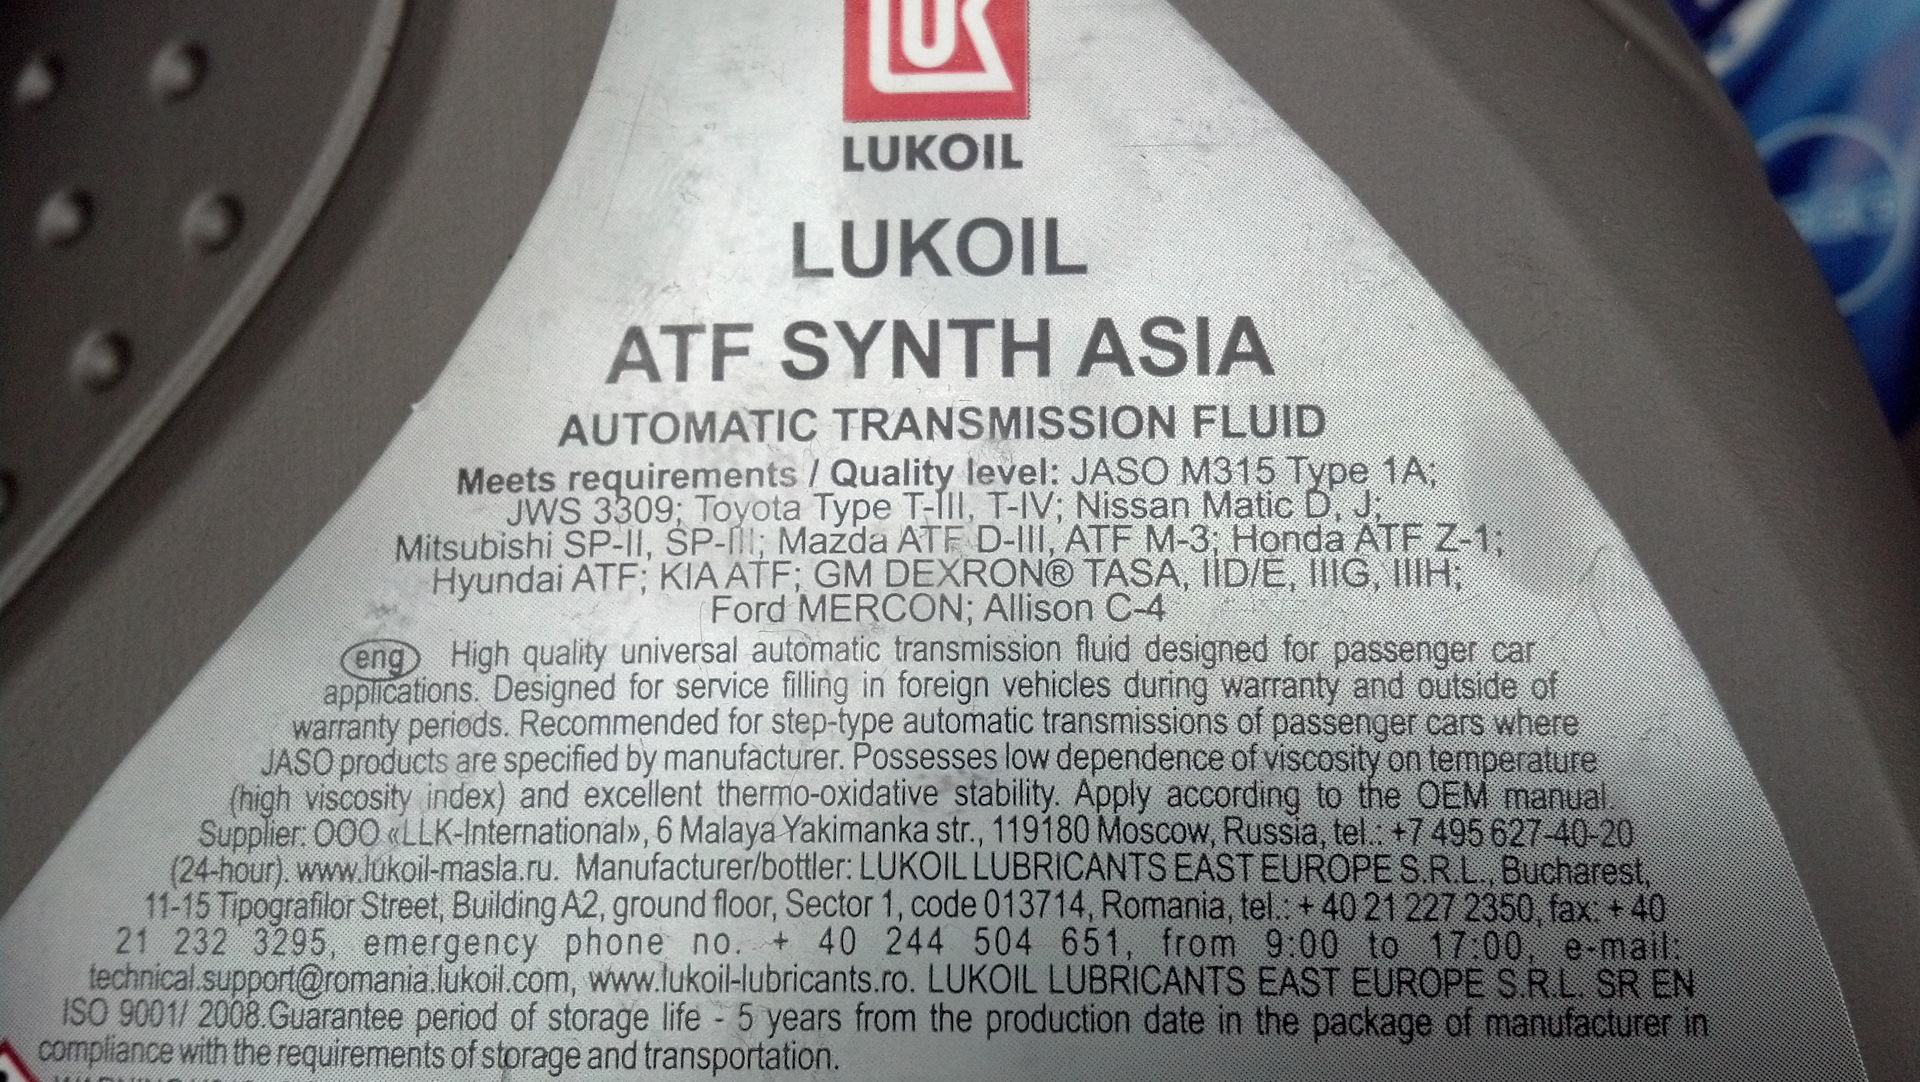 Лукойл atf asia. Lukoil ATF Synth 15. Lukoil ATF Synth m 15. Лукойл ATF Synth m 14. Лукойл ATF Synth Asia.